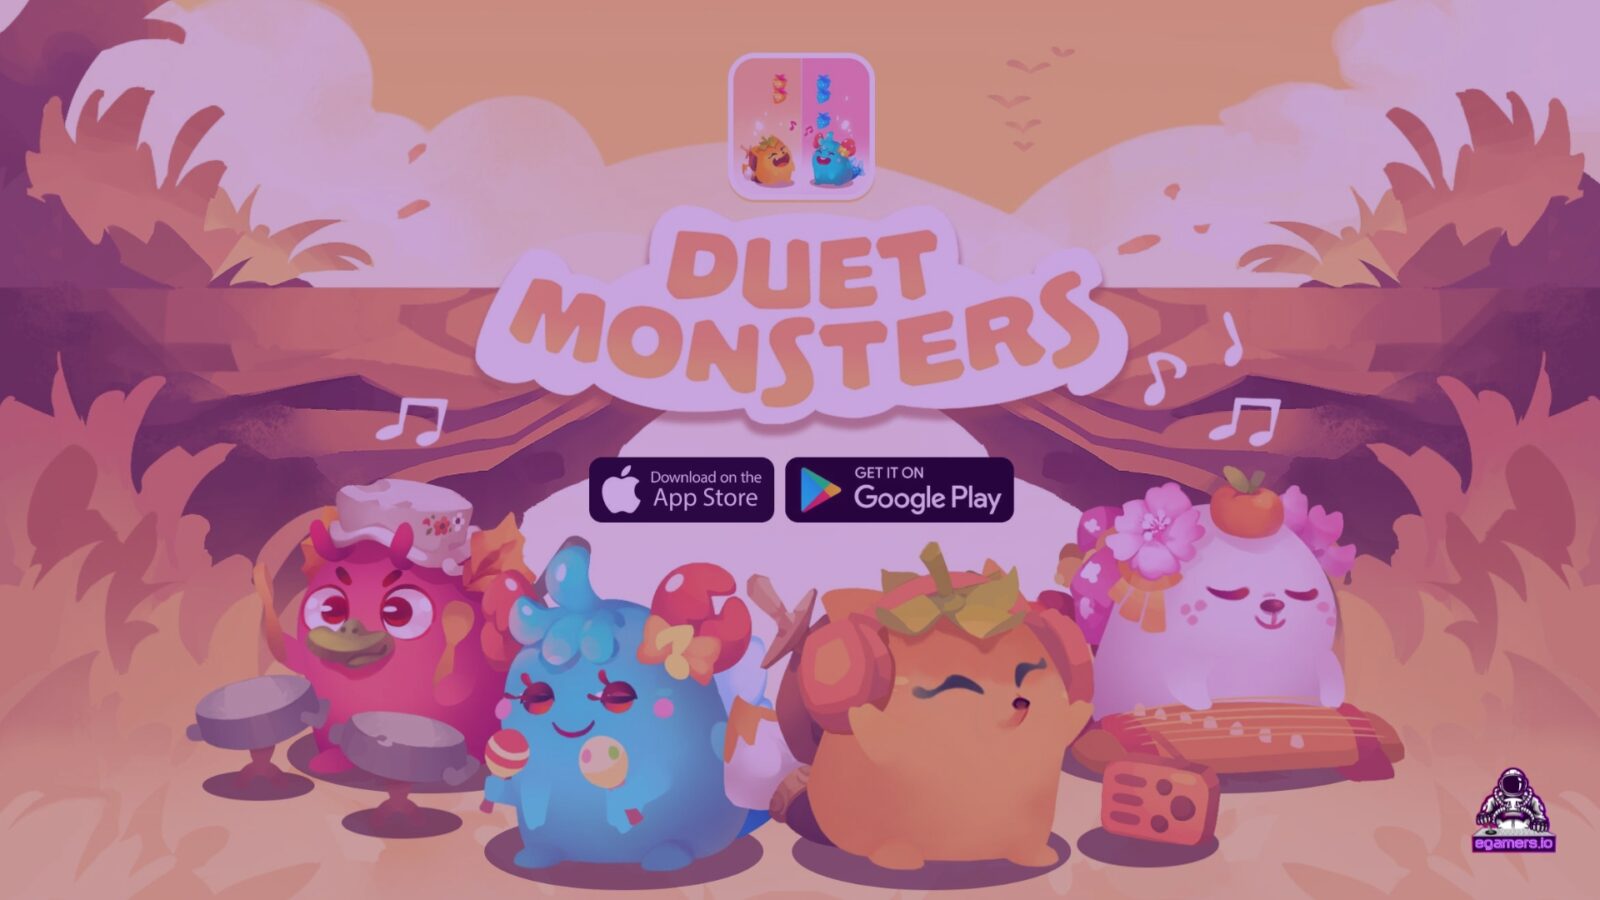 Axie Infinity Launches New Mobile Rhythm Game: Duet Monsters